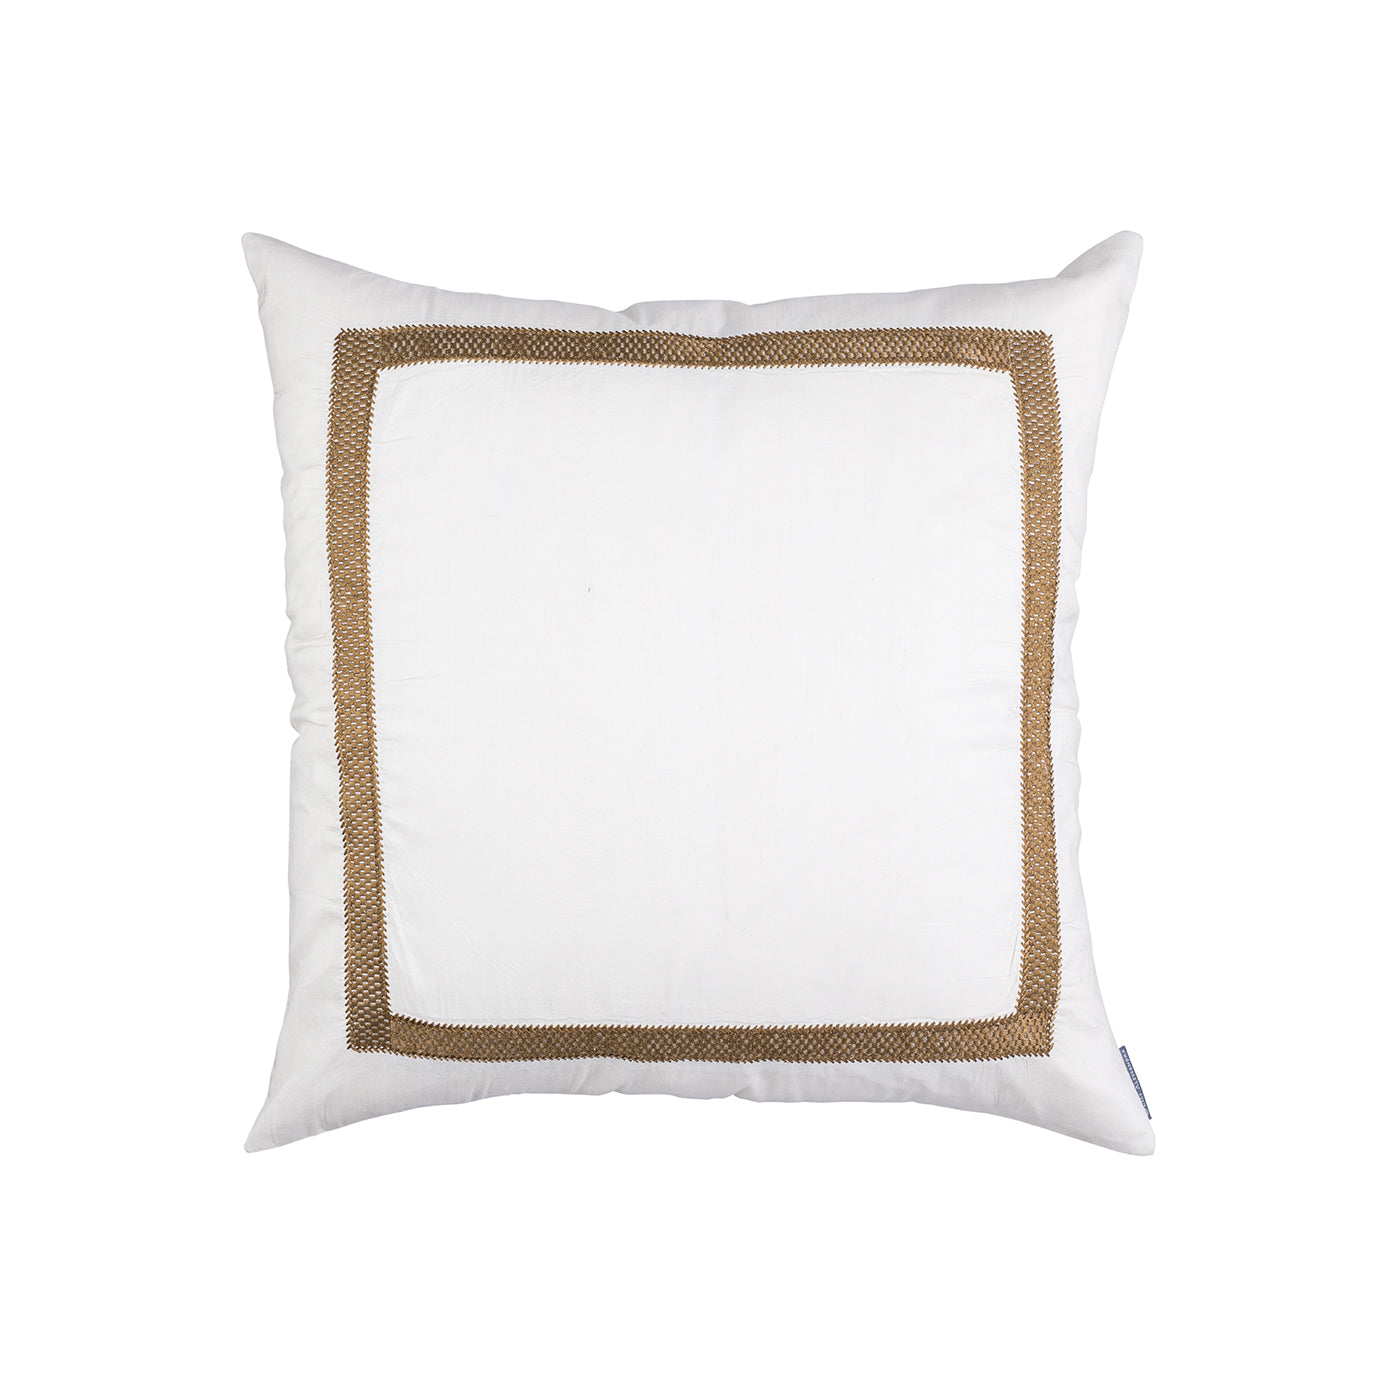 Caesar Sq. Pillow Ivory Silk With Gold Basketweave Machine Embroidery 24X24